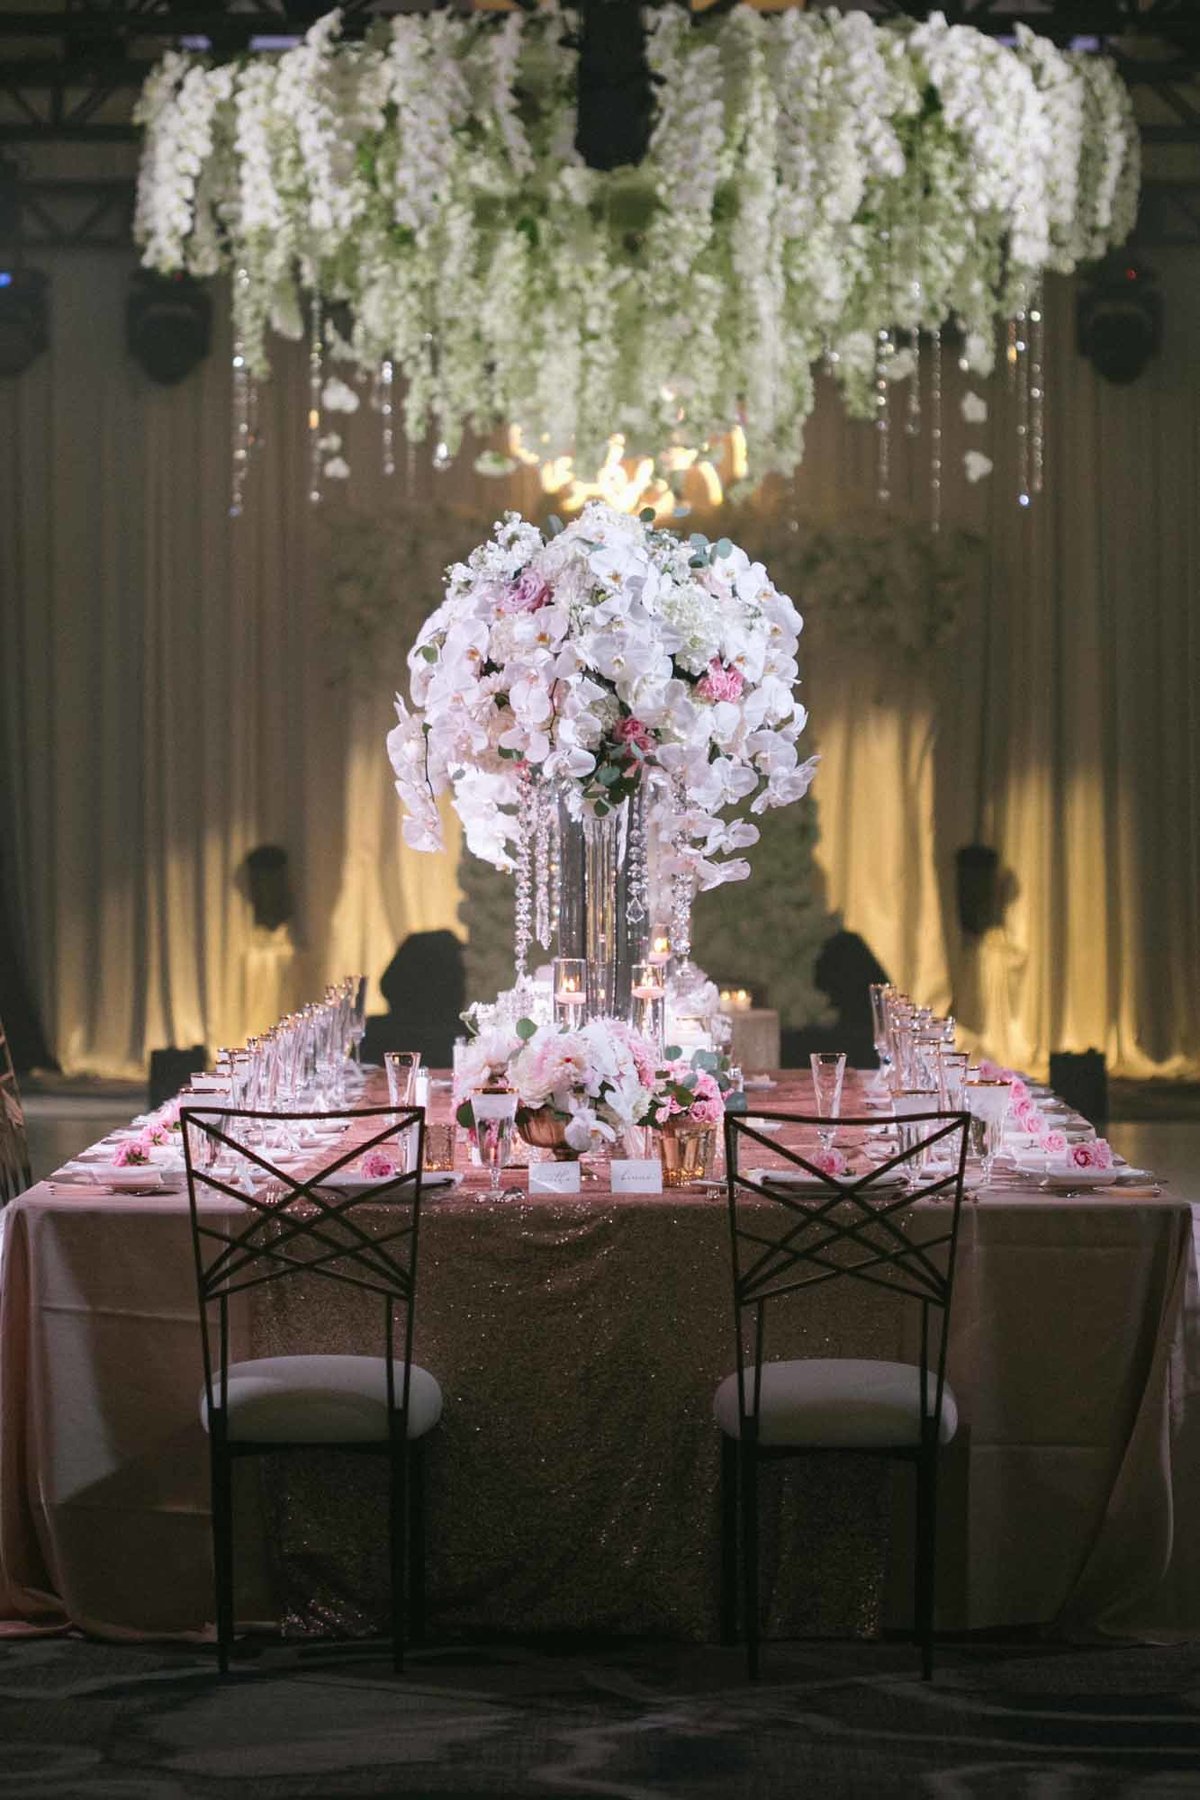 Tall white and blush floral arrangements line the head table at this luxe Indian Fusion wedding